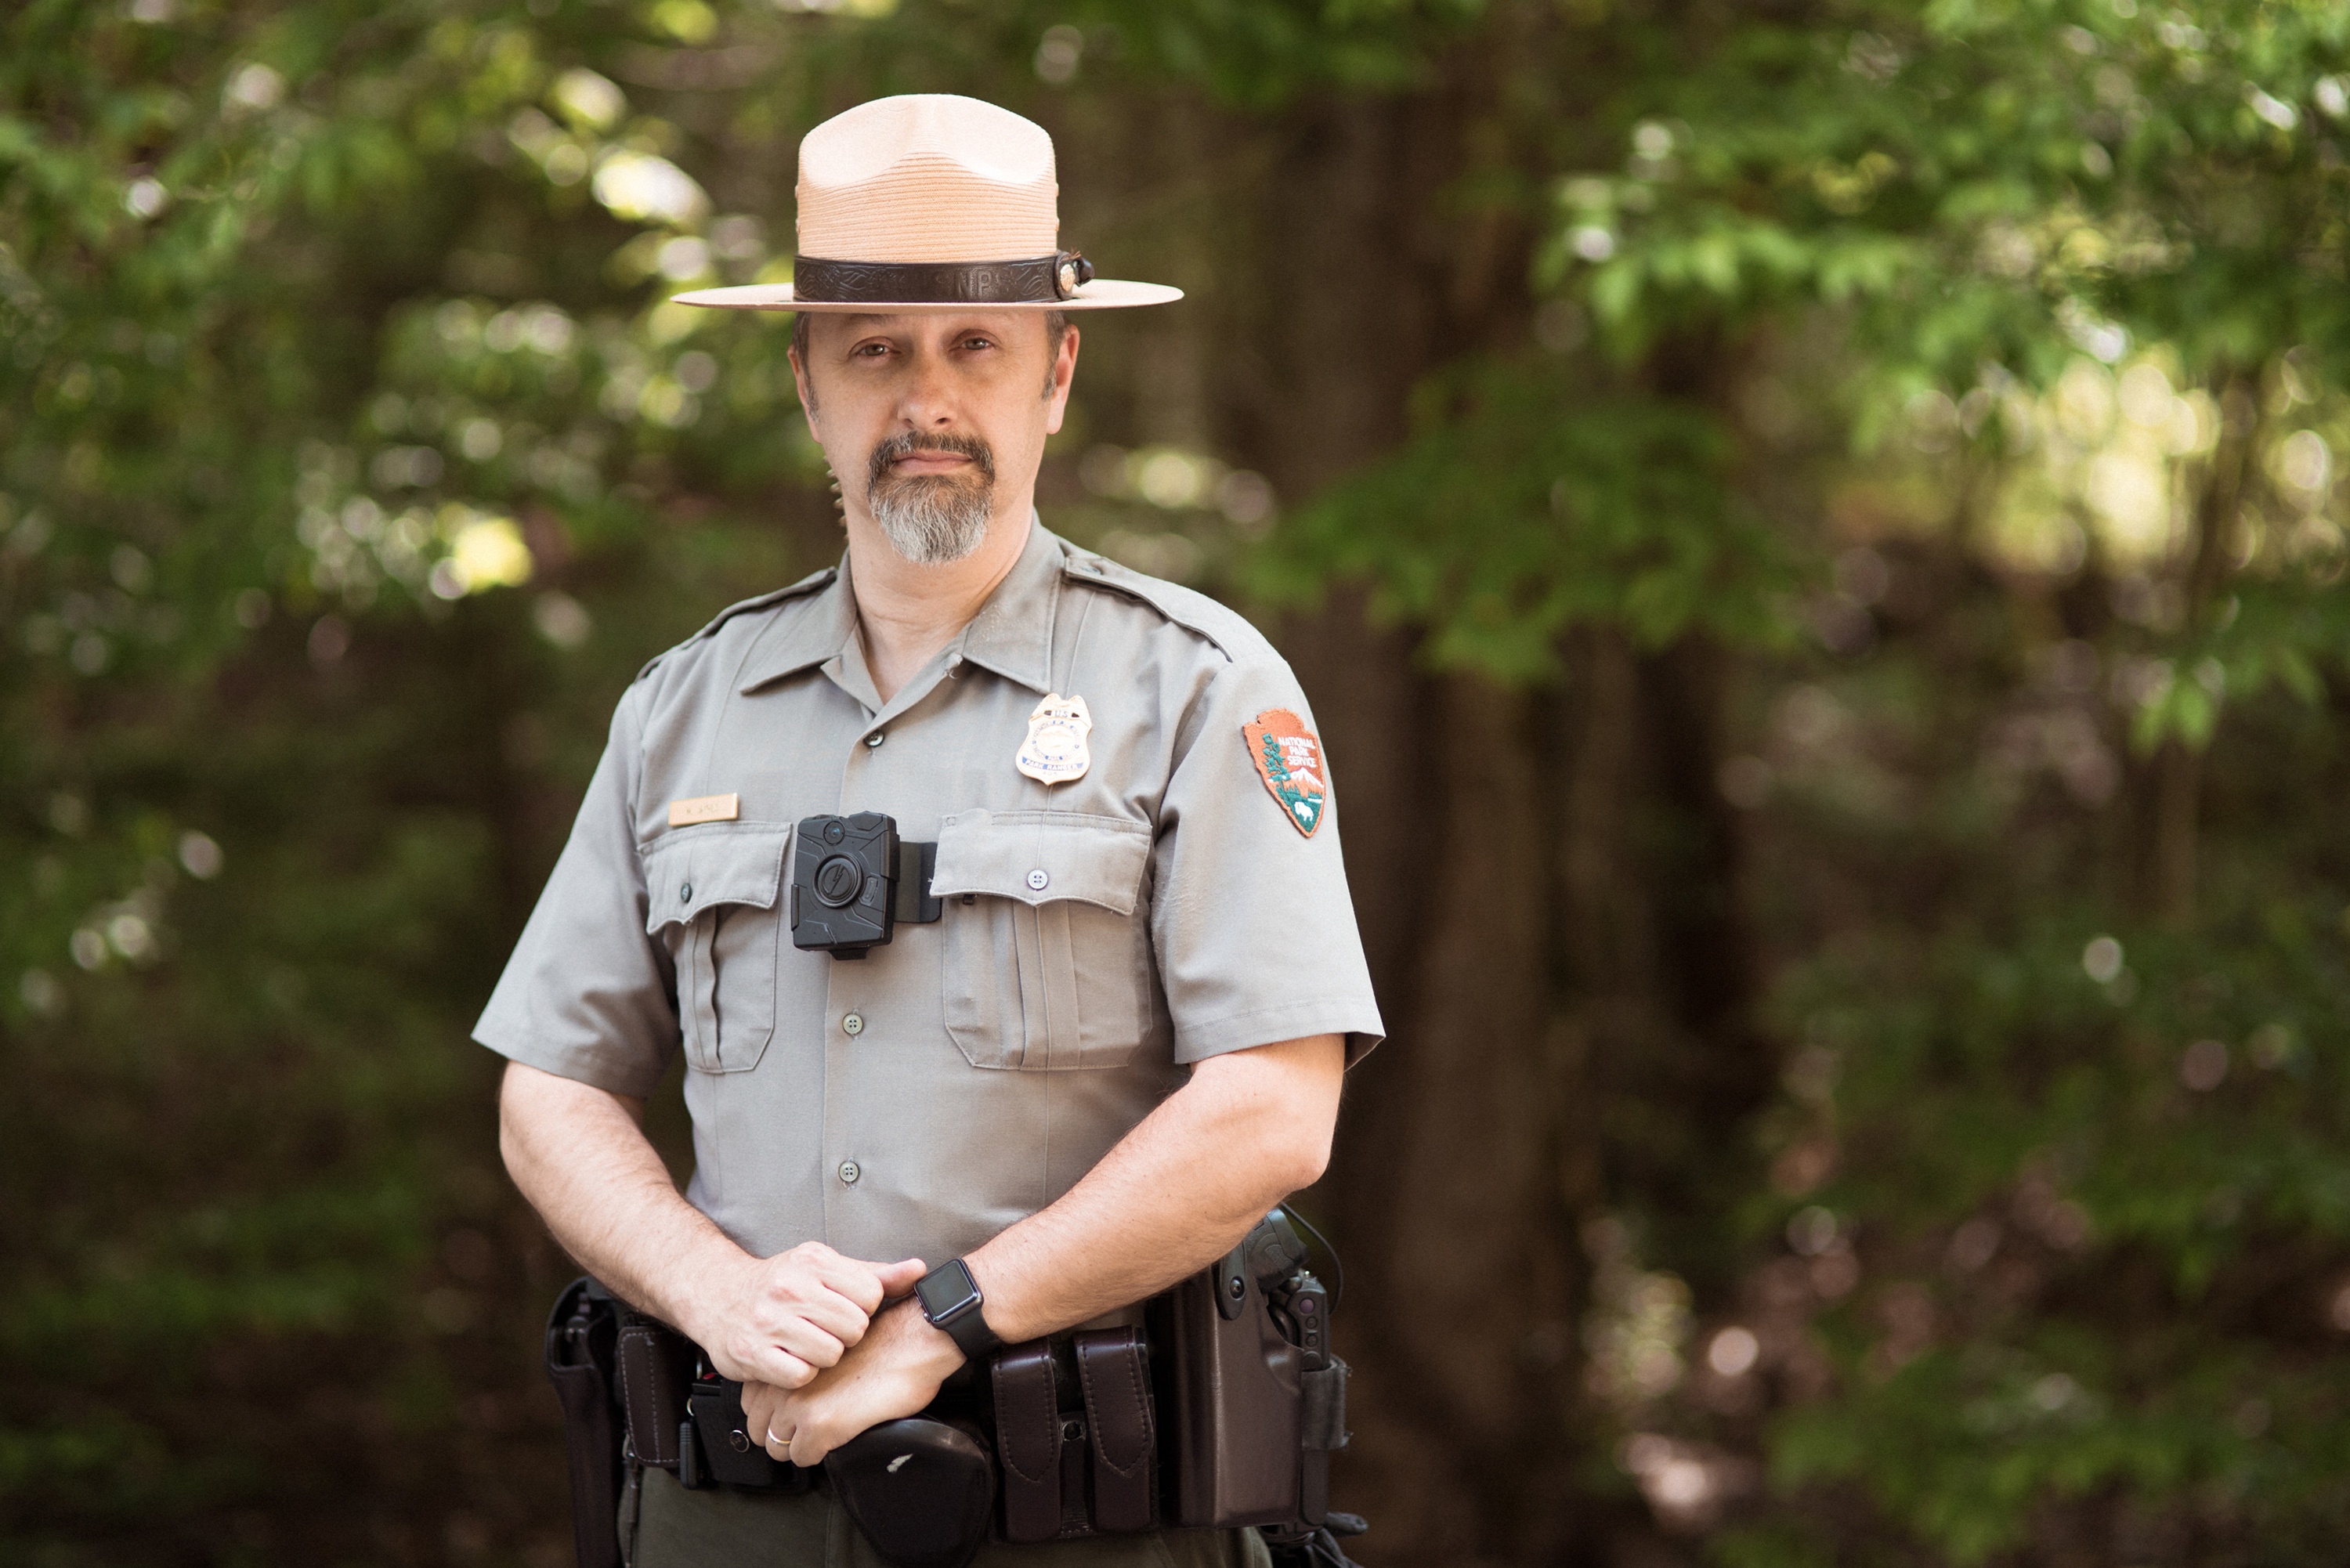 Will Jaynes patrols the Appalachian Trail as a law enforcement officer. He has worked with the National Park Service for 15 years.